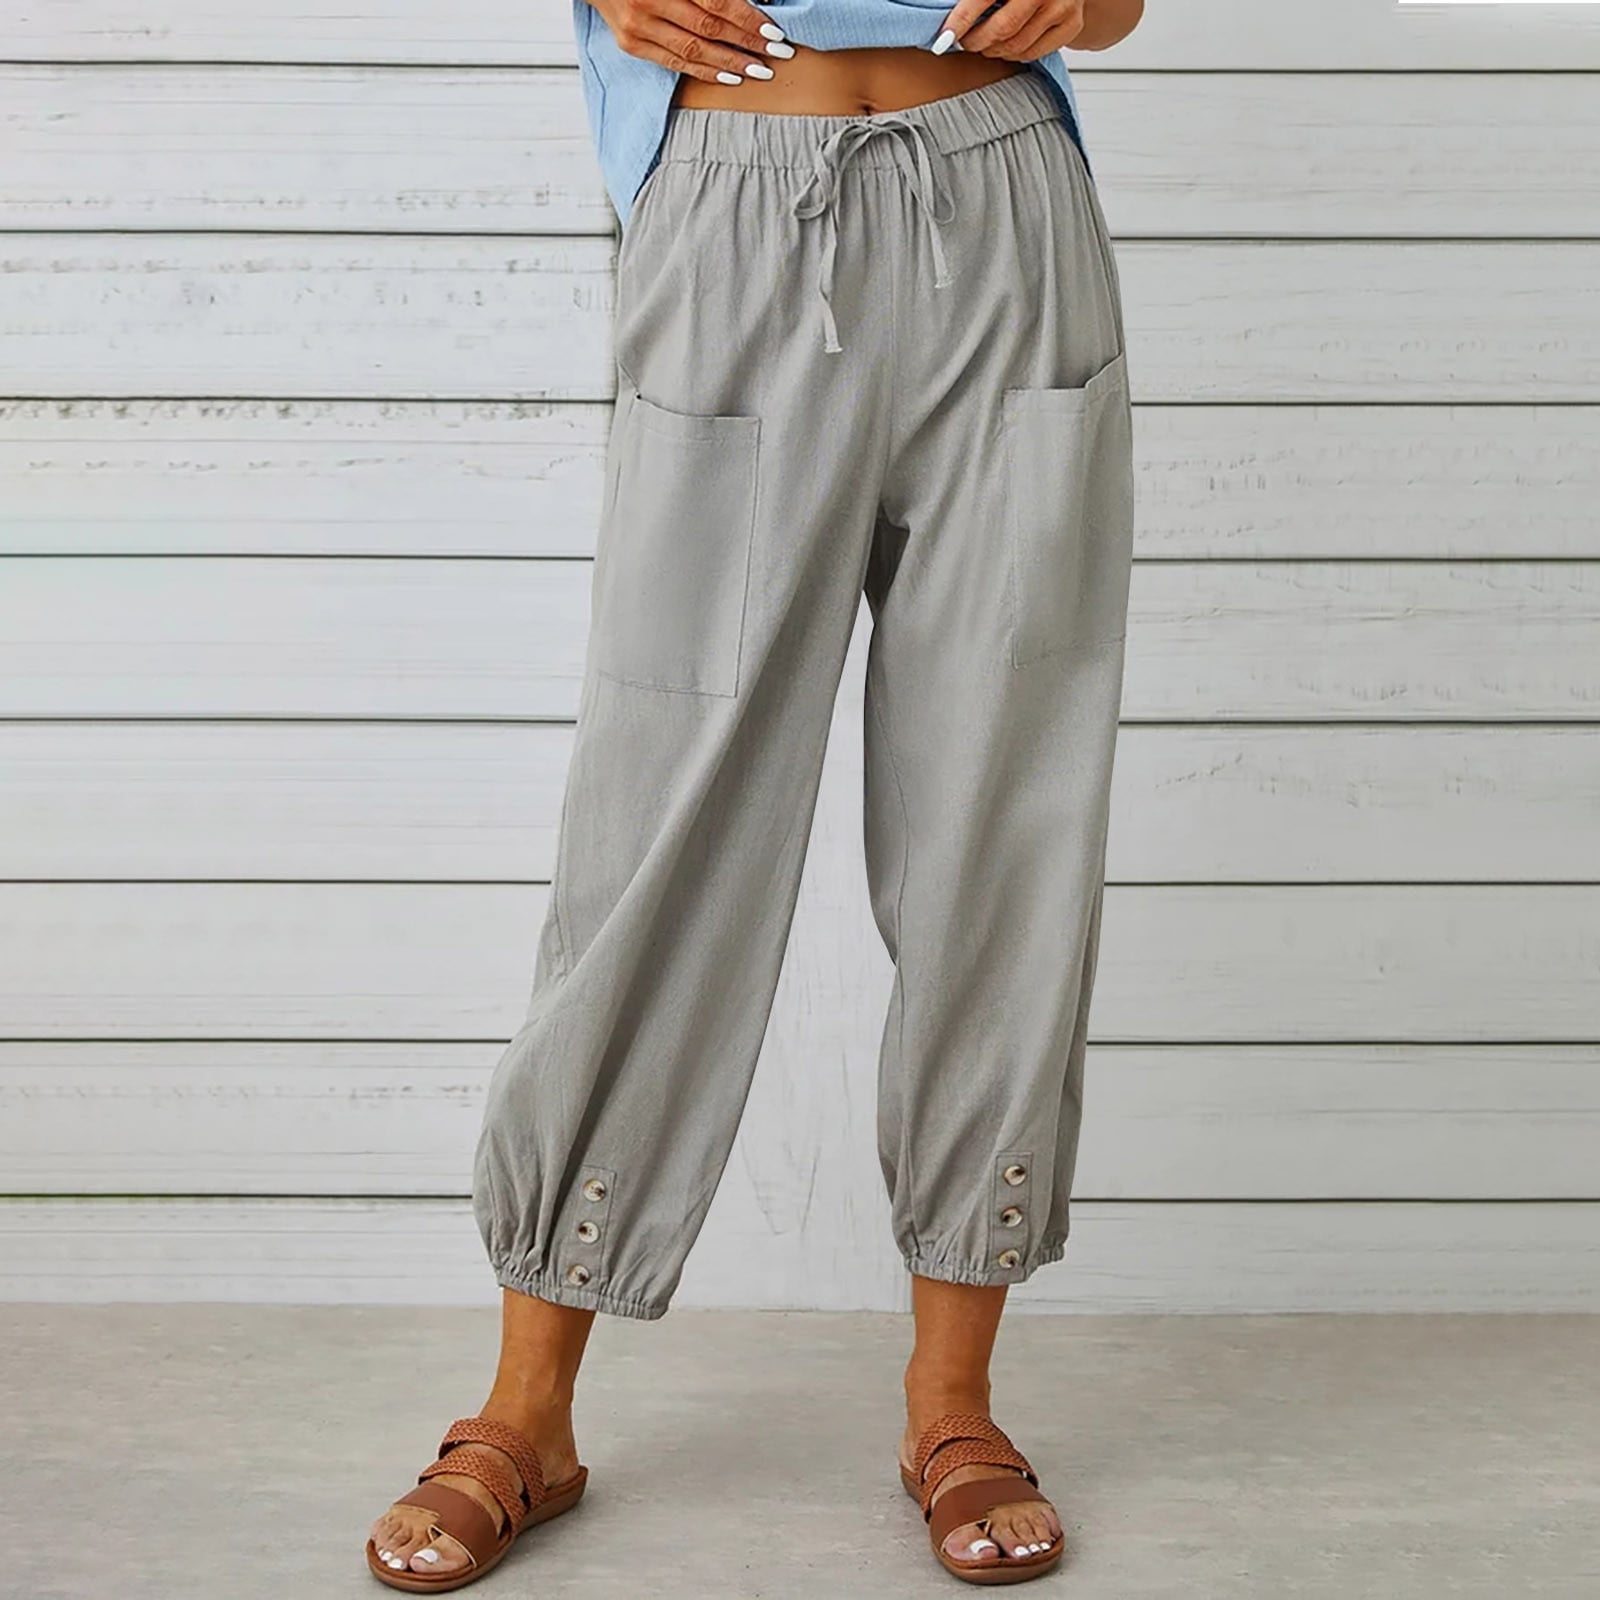  NC Pants for Women, Womens Summer Beach Capris Cropped Pants,Print  Trouser,Casual Pockets Cotton Linen Wide Leg : Clothing, Shoes & Jewelry